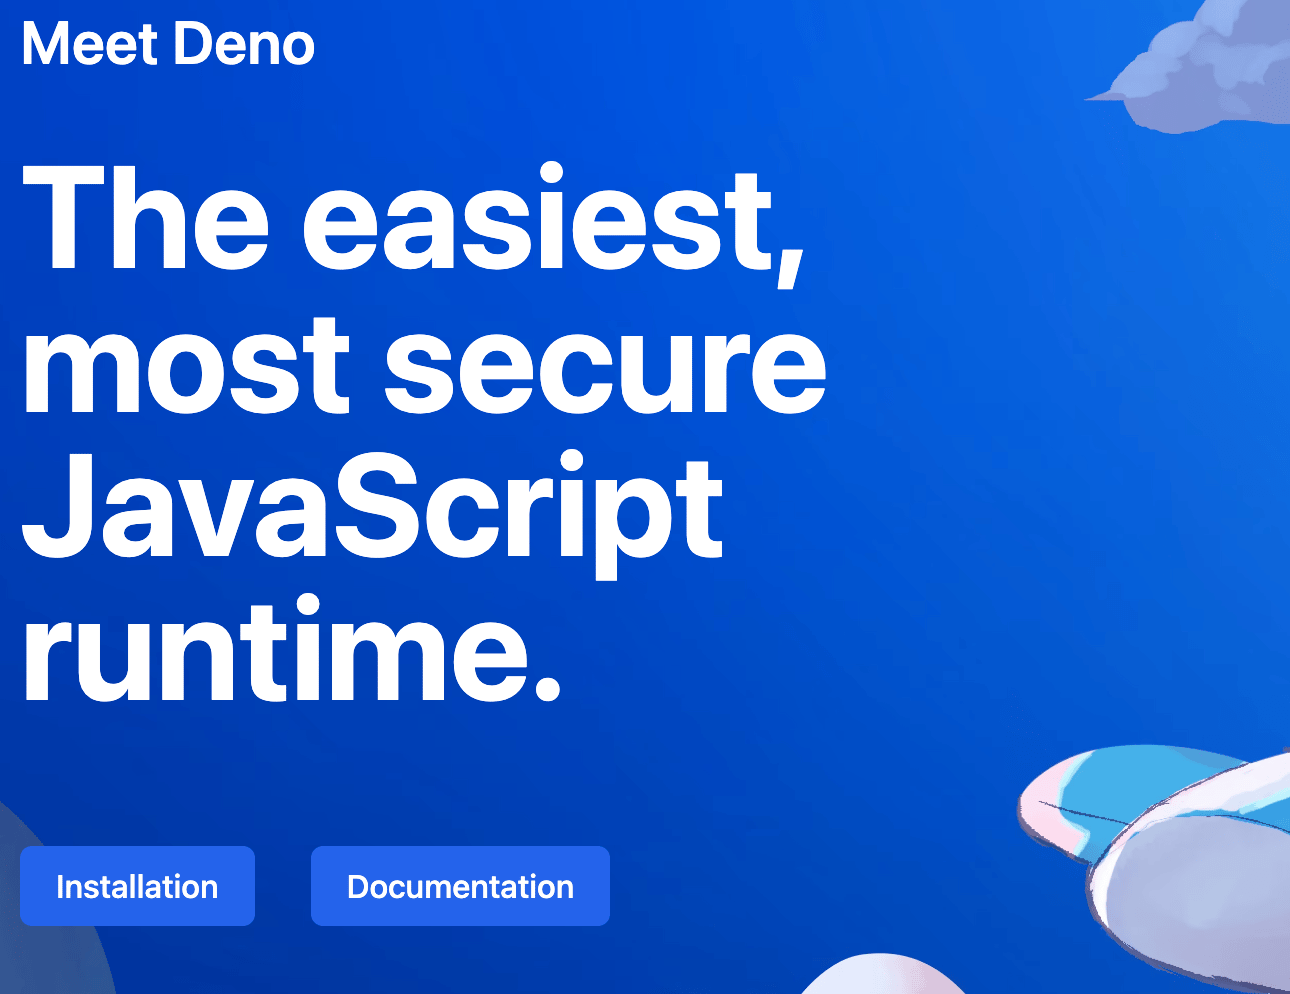 Deno landing page where it says: Meet Deno - The easiest, most secure JavaScript runtime.